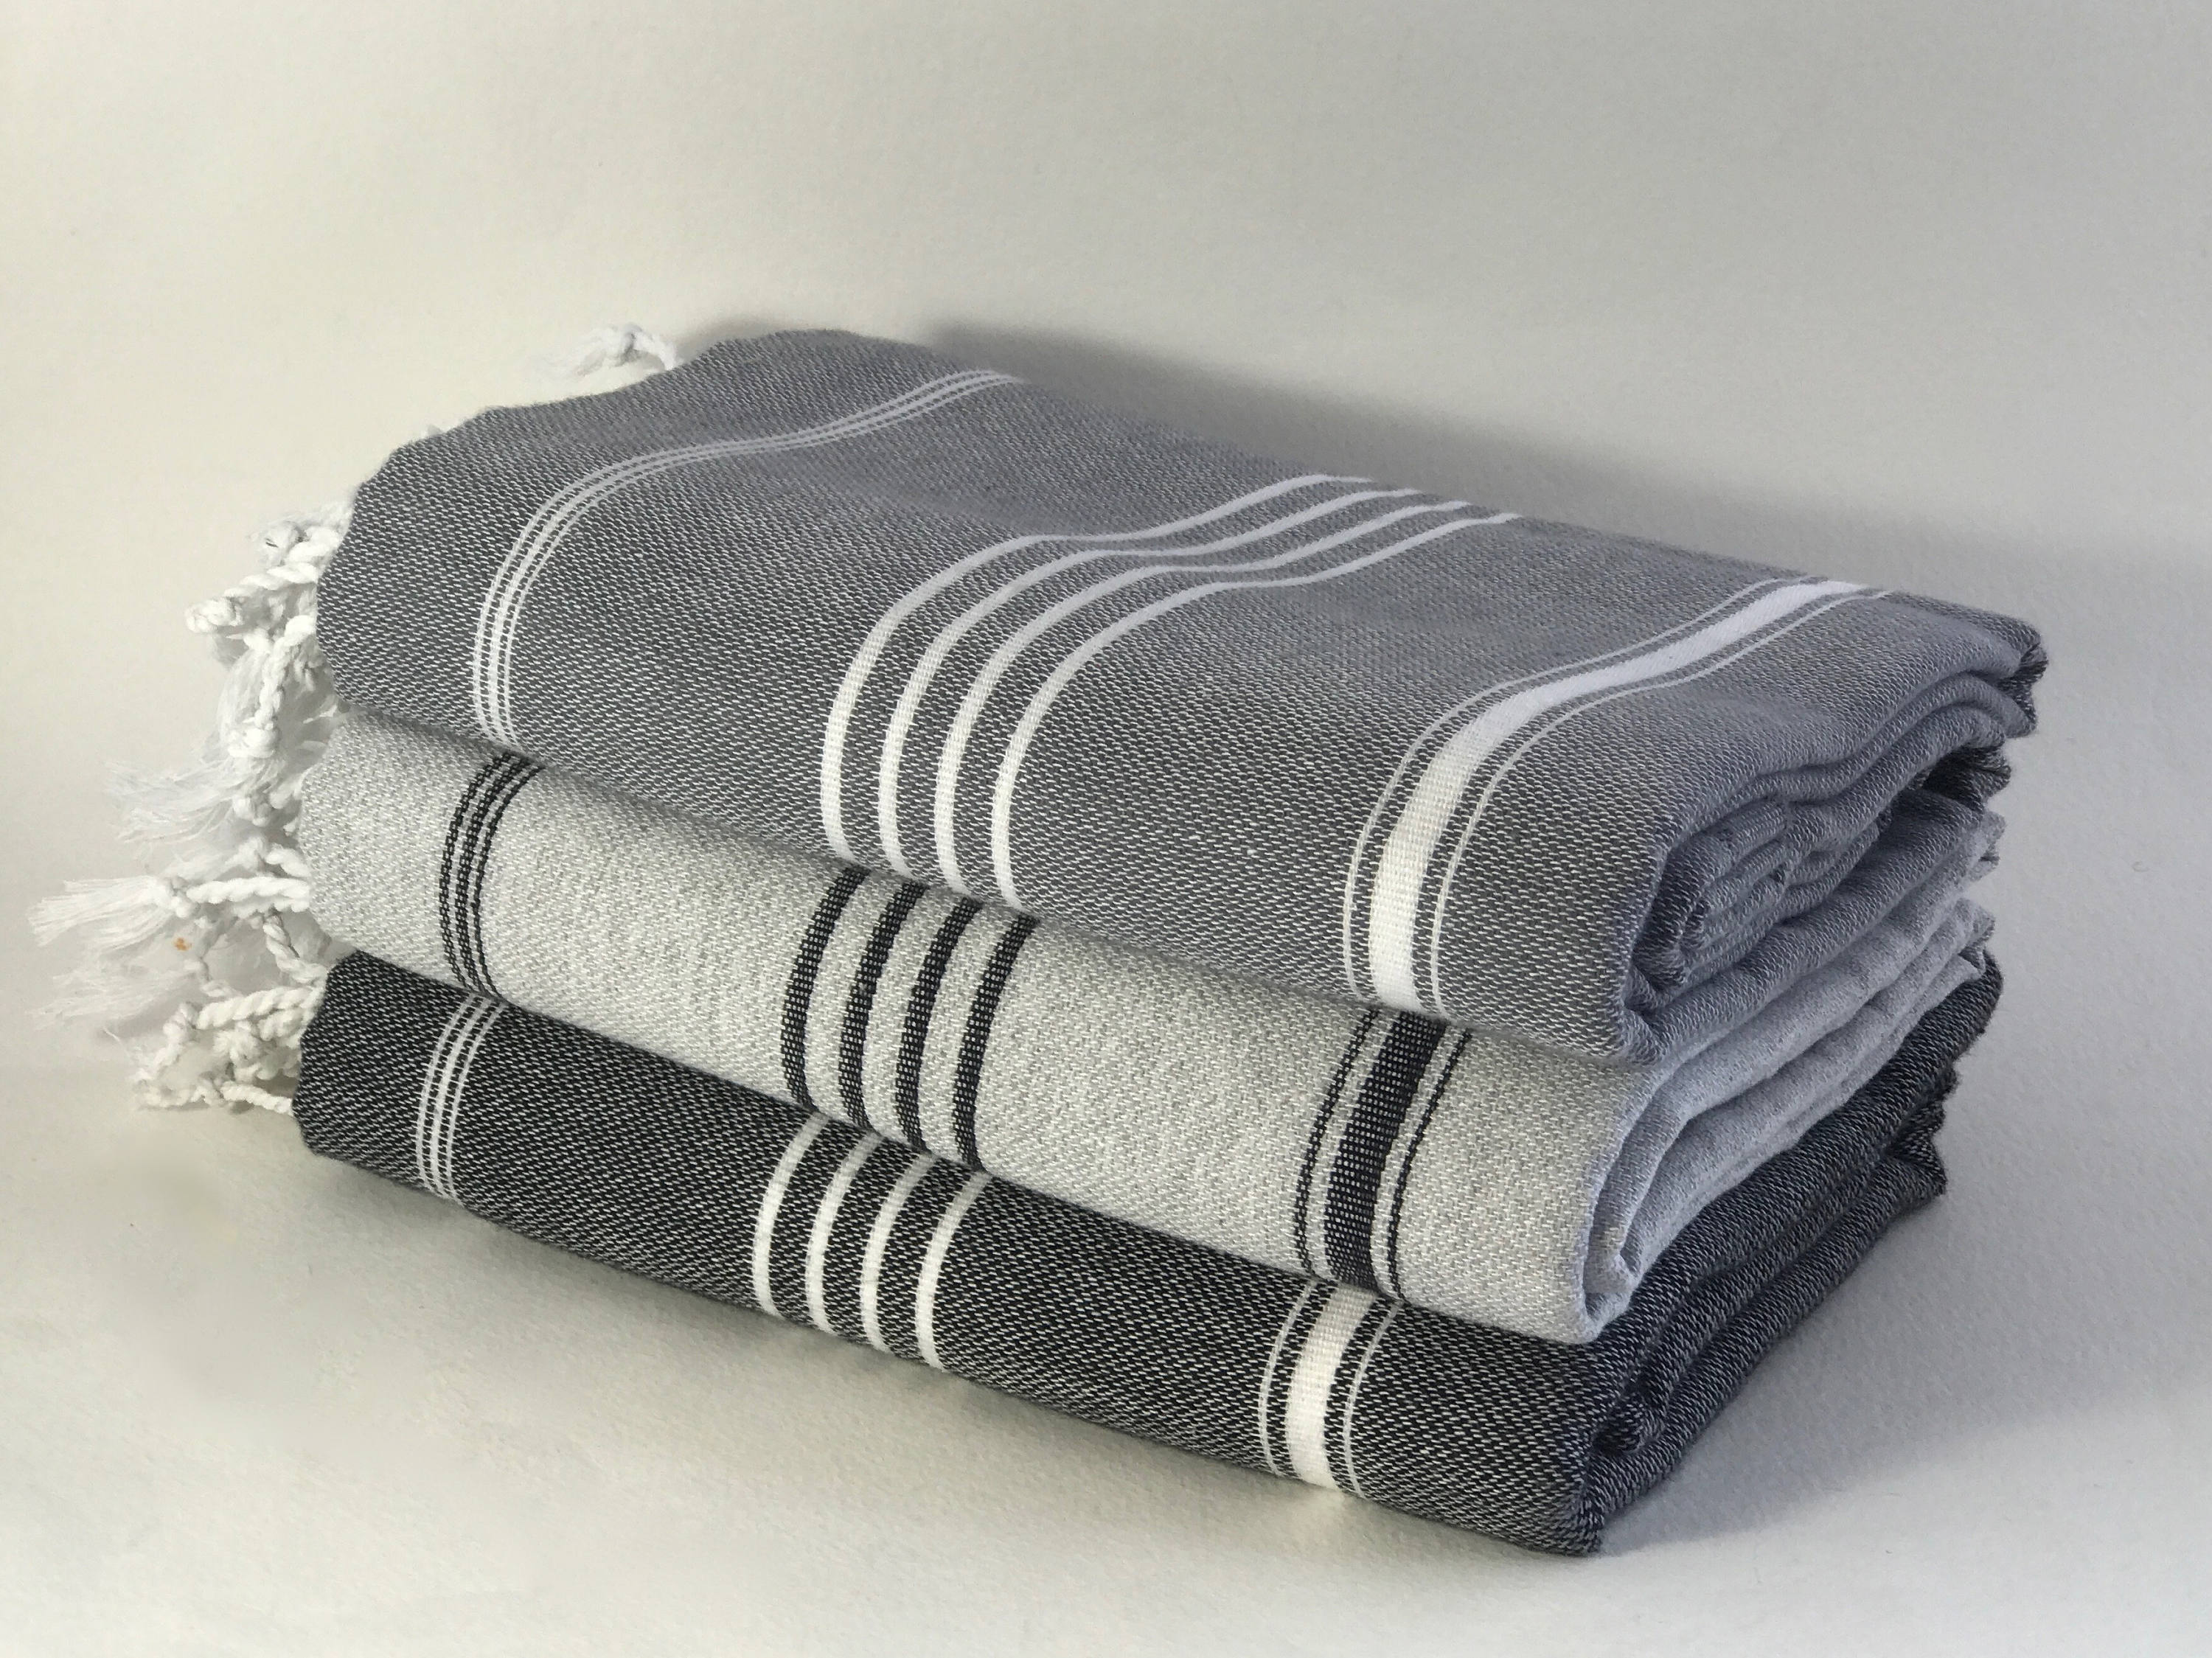 A stack of Turkish towels